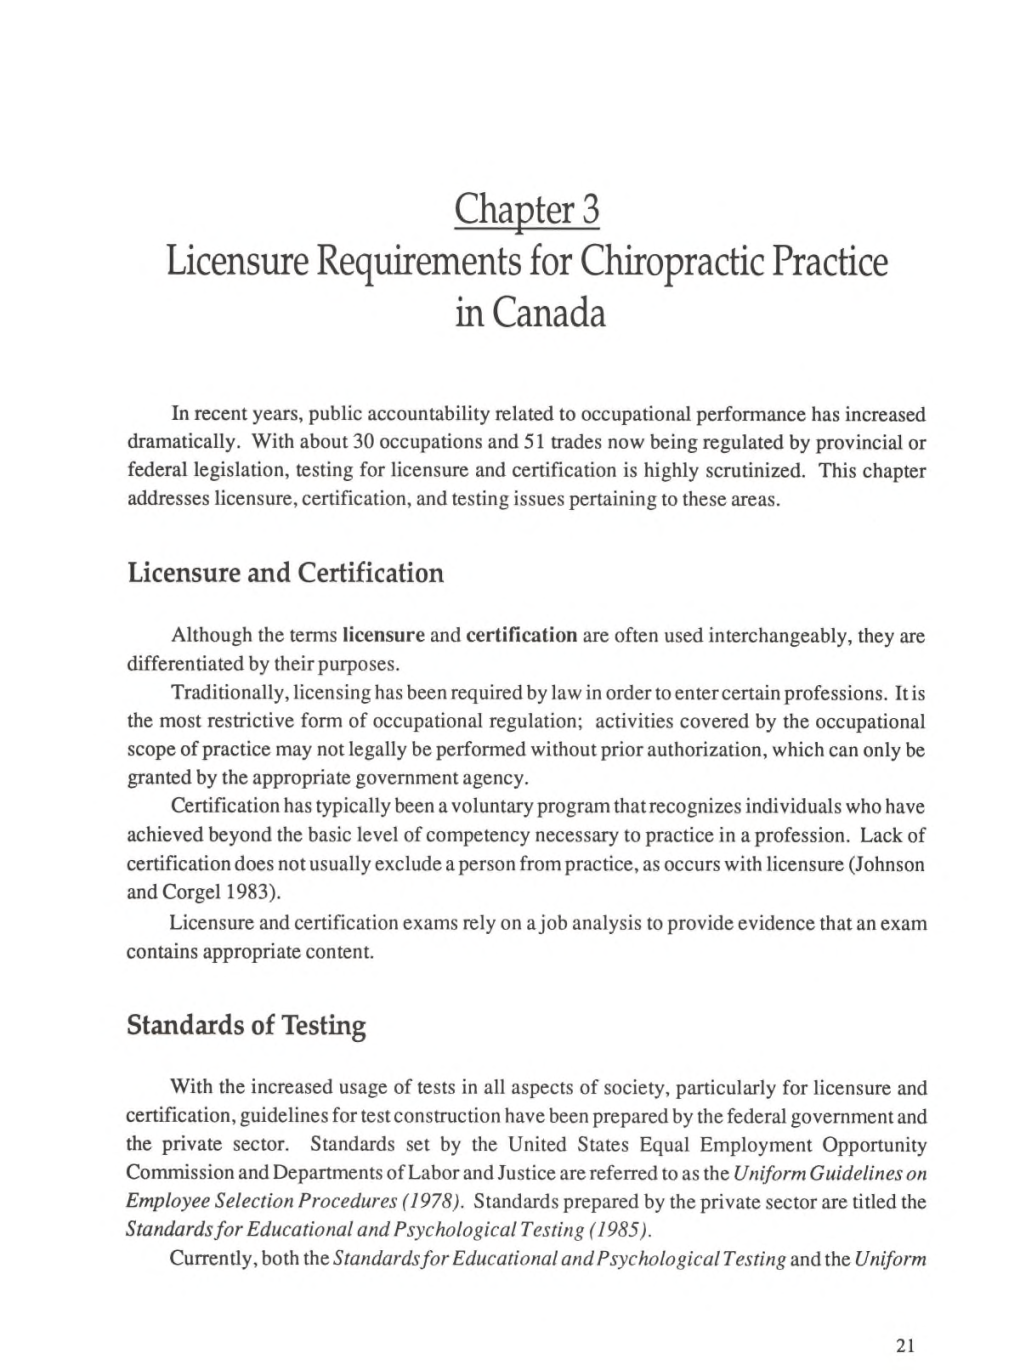 Chapter 3 Licensure Requirements for Chiropractic Practice in Canada